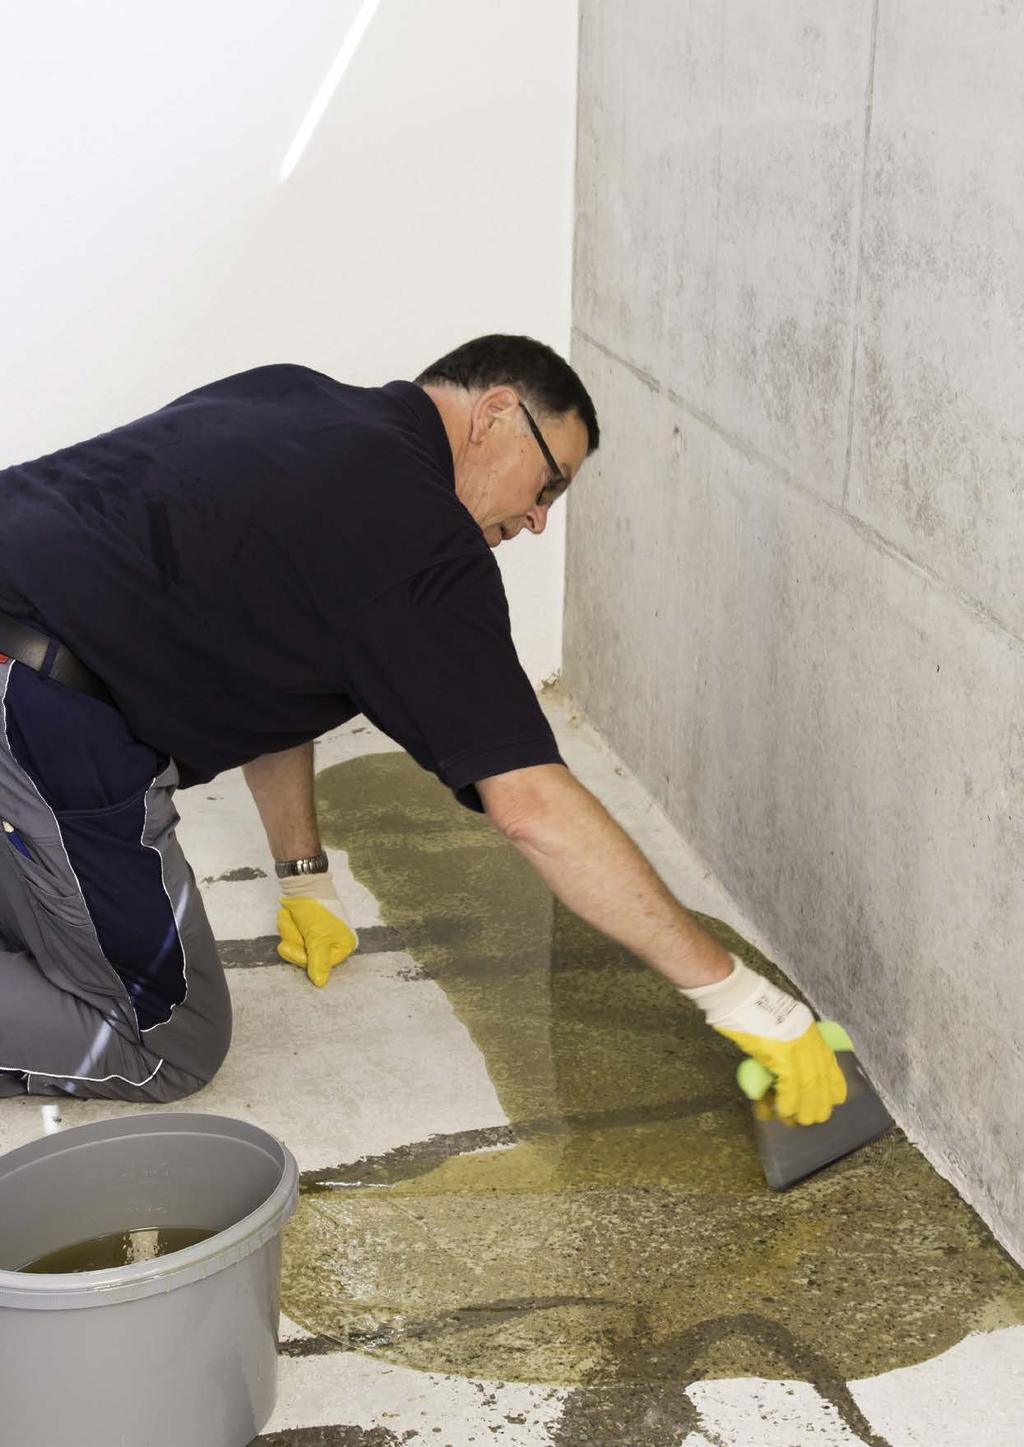 coat* Epoxy damp proof membrane for substrates with very high moisture content above 99% RH* ().